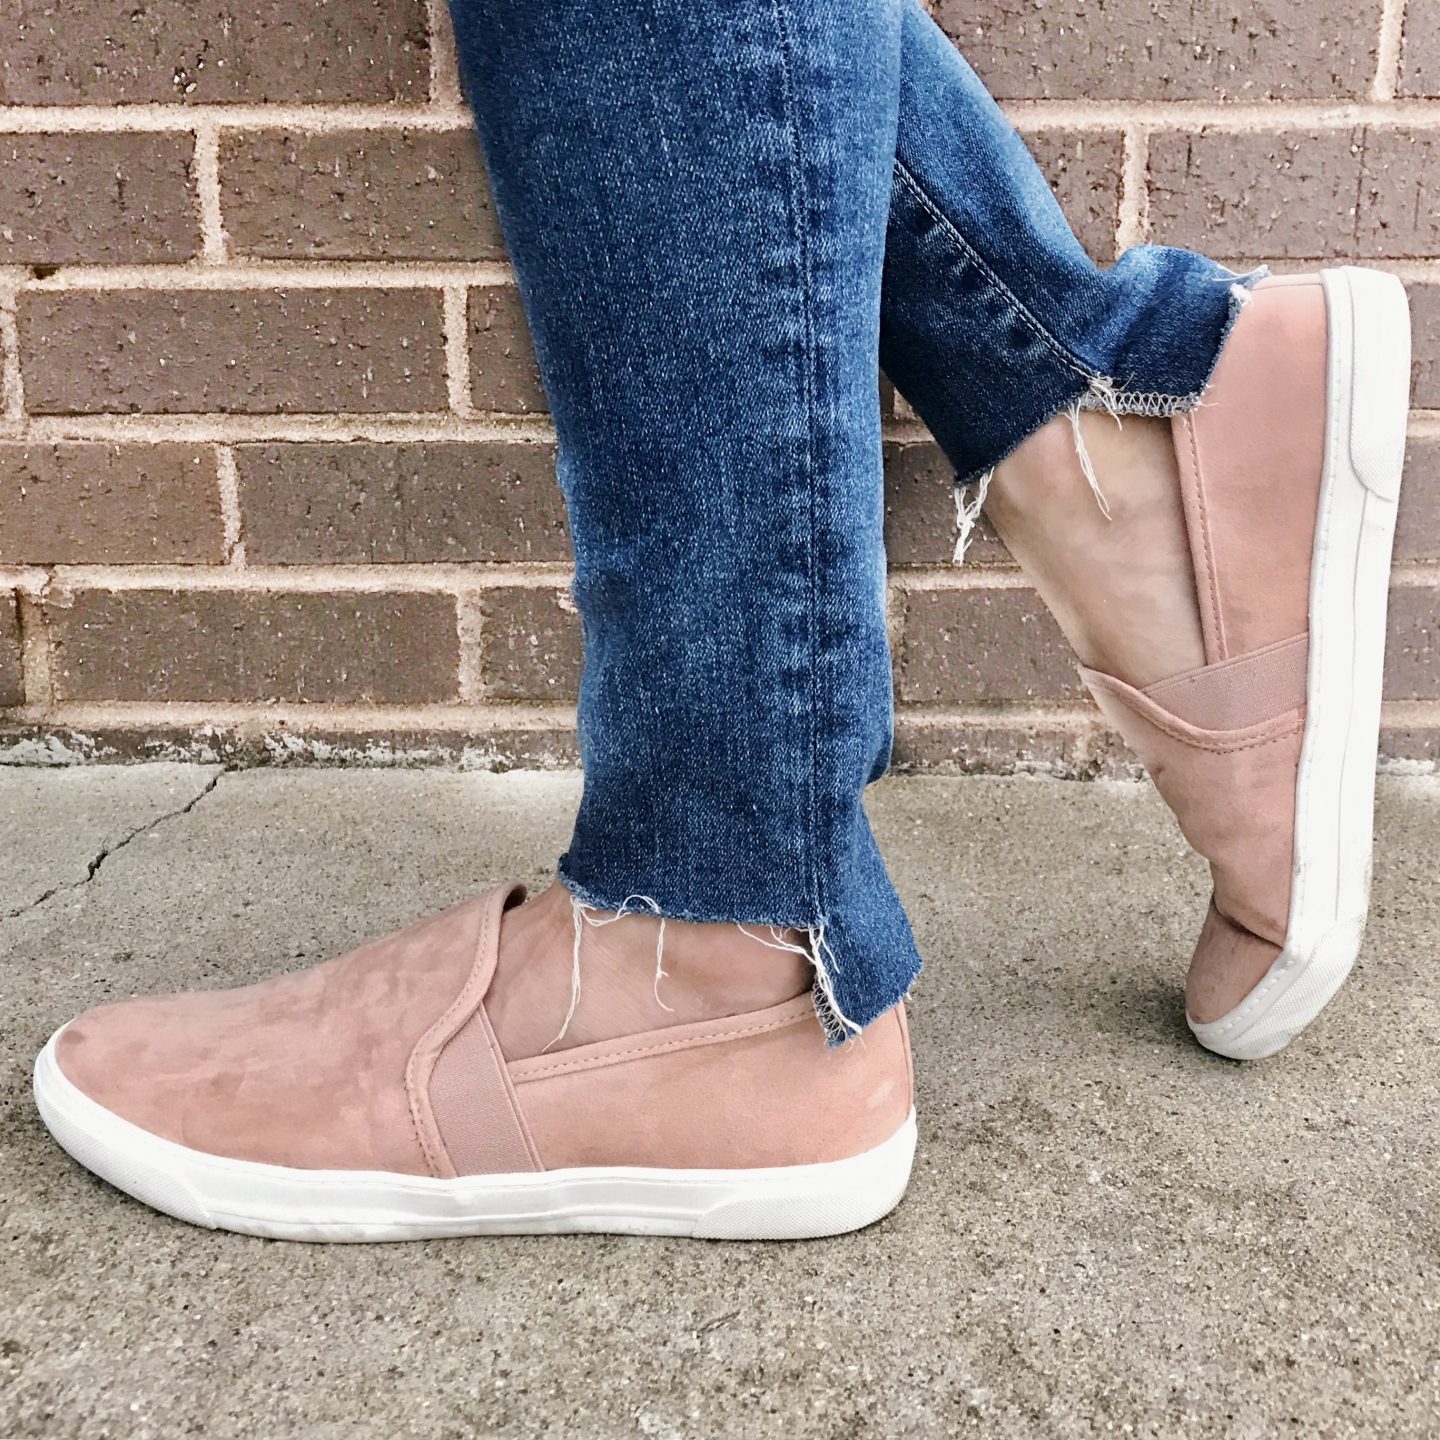 Blush Sneakers for Under $20!